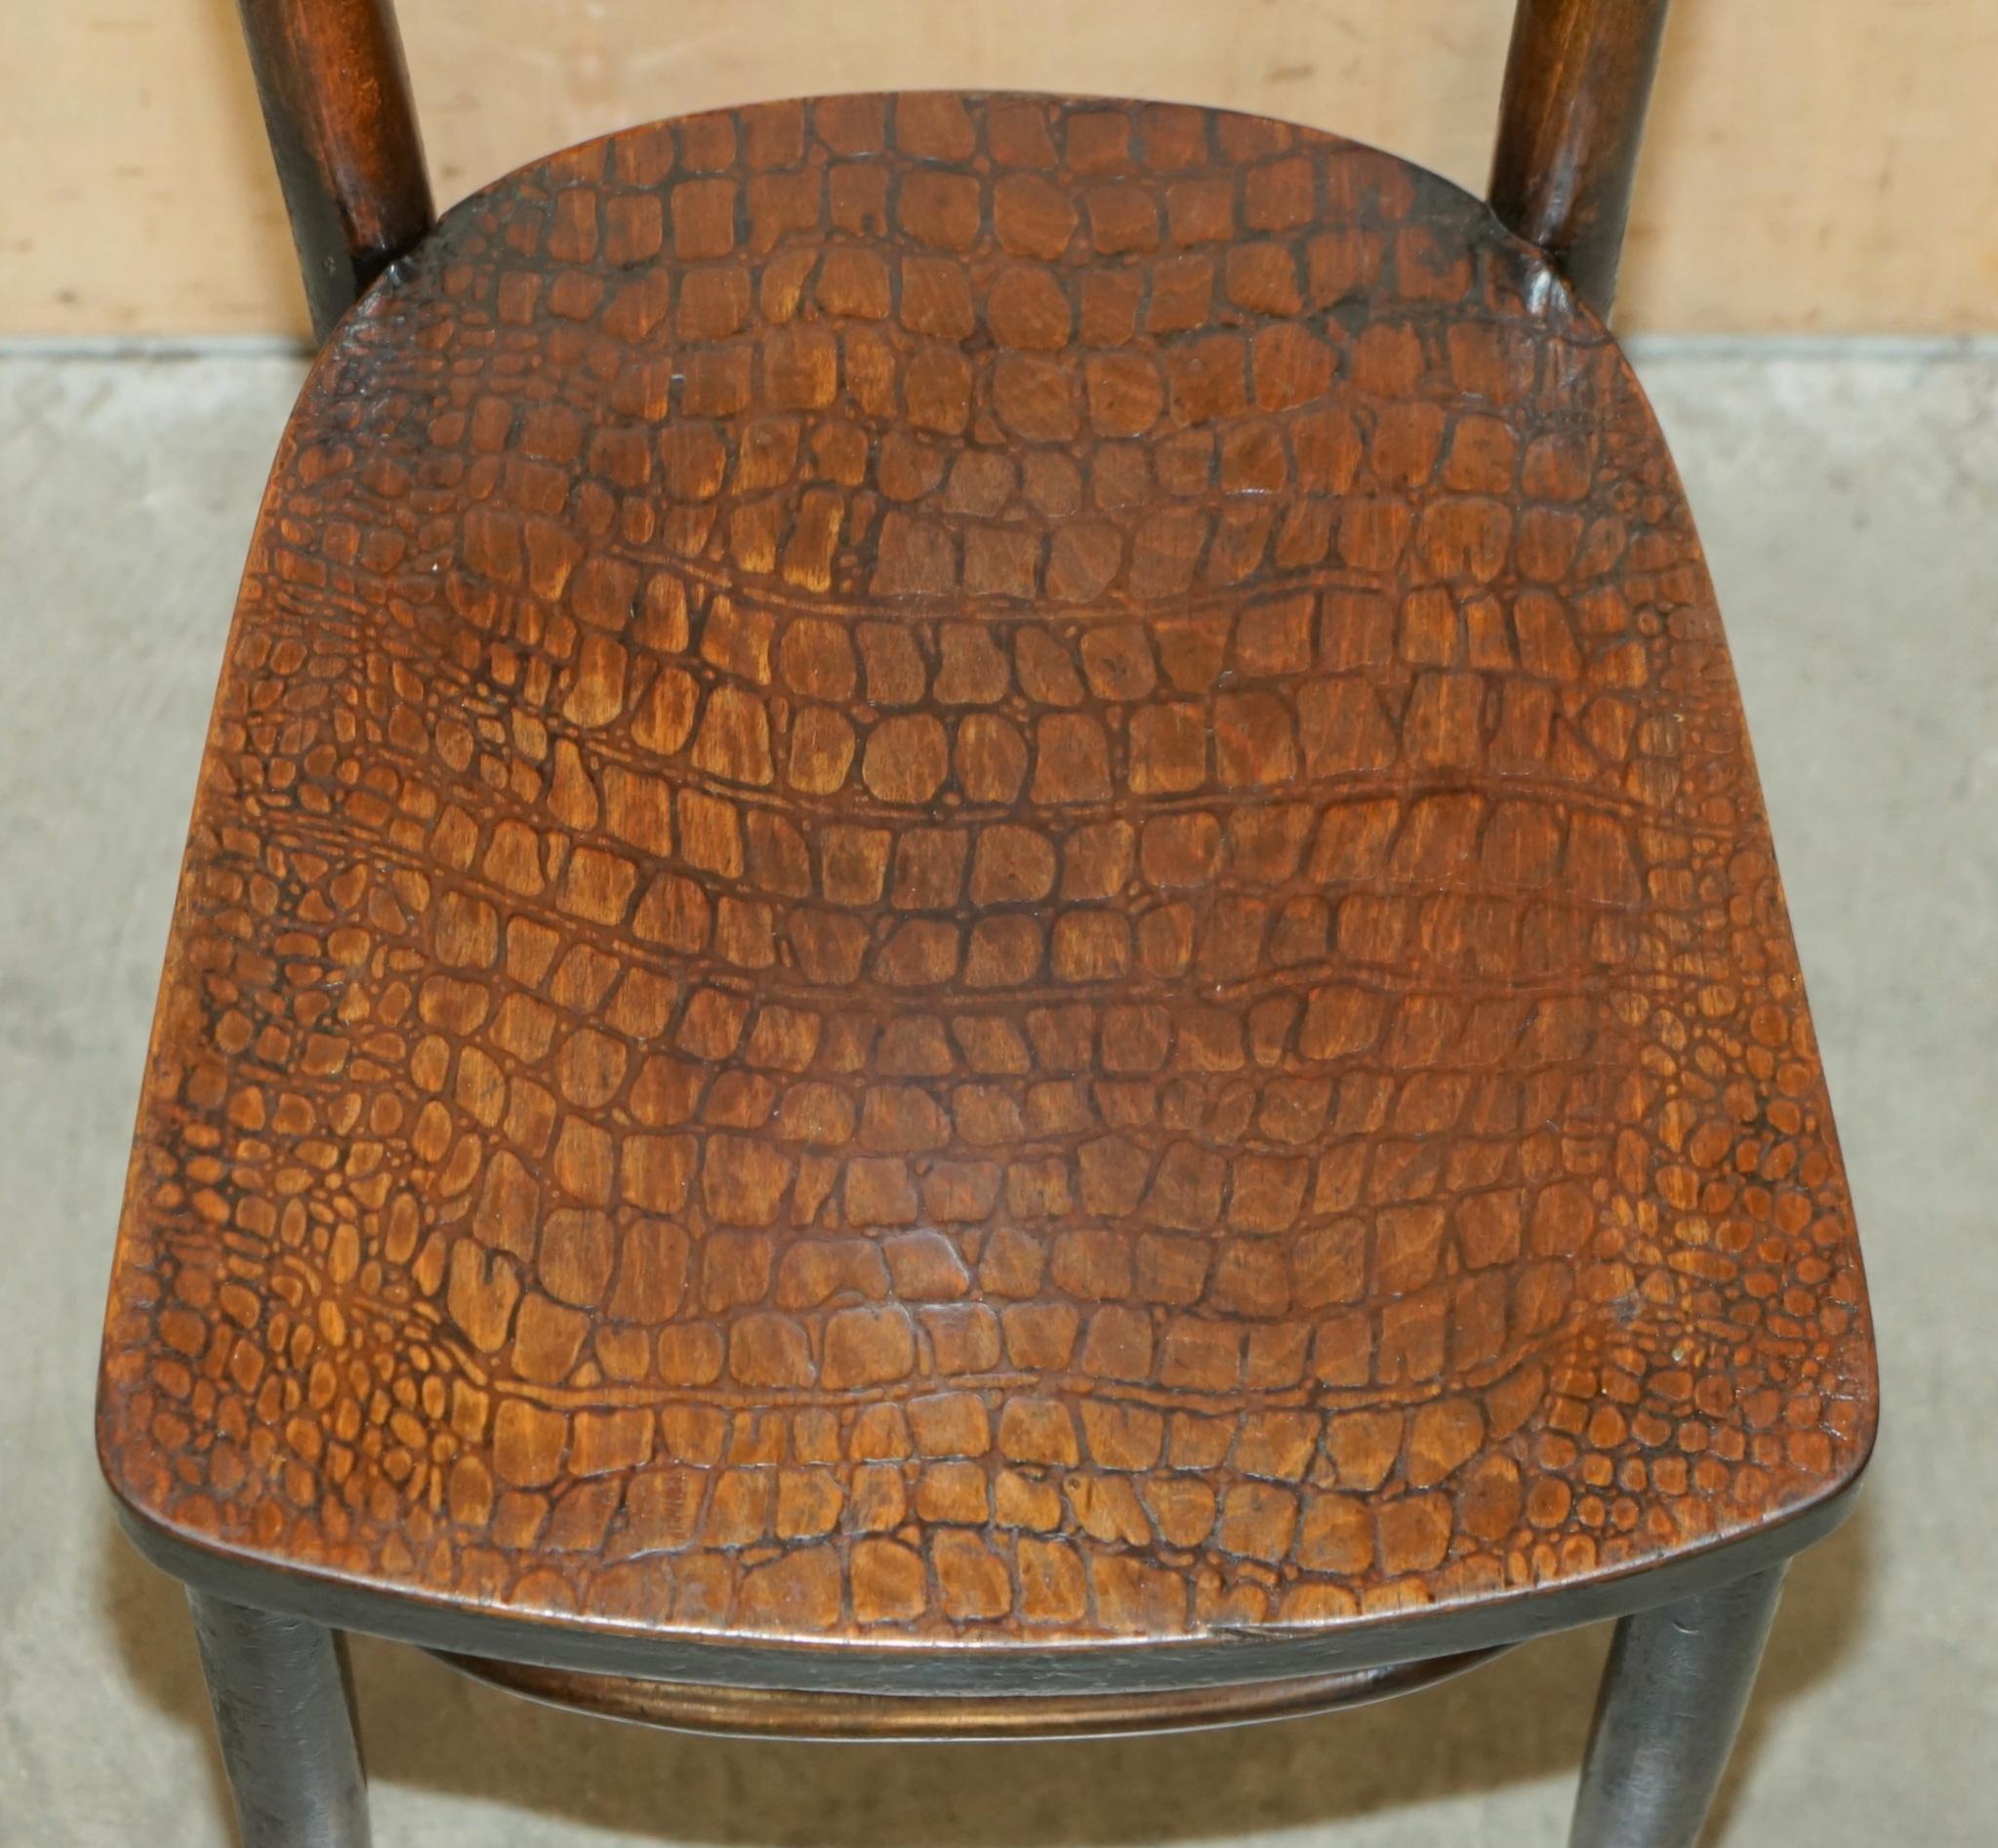 FOUR FiNE ANTIQUE THONET CROCODILE ALLIGATOR CARVED WOOD PATINA DINING CHAIRS 4 For Sale 4